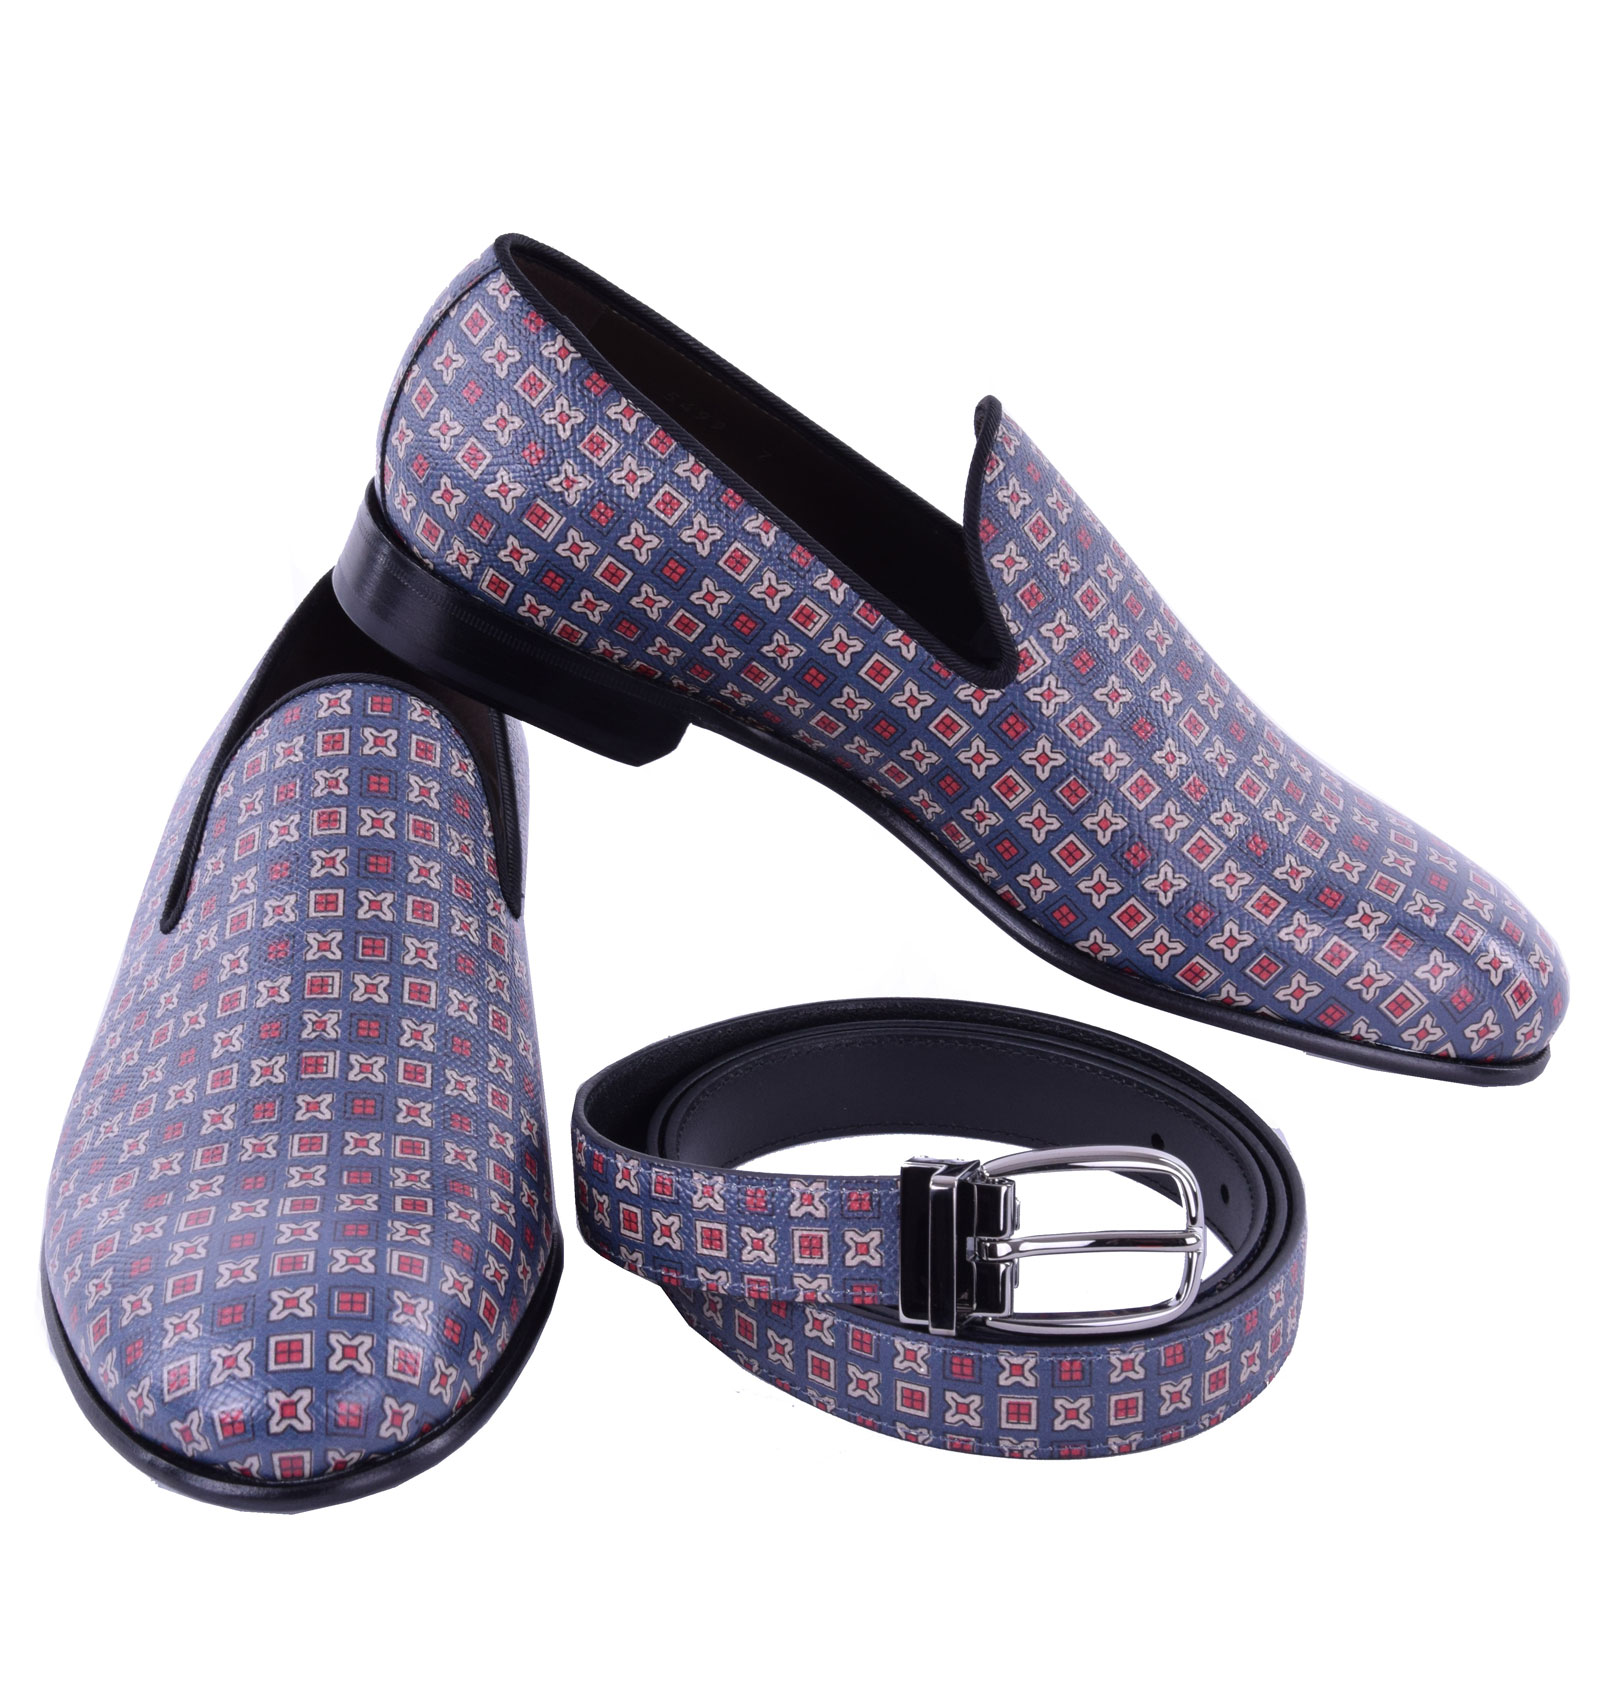 Dolce_Gabbana_Gift_Set_with_Slippers_and_Belt_ML4107_3_32.jpg